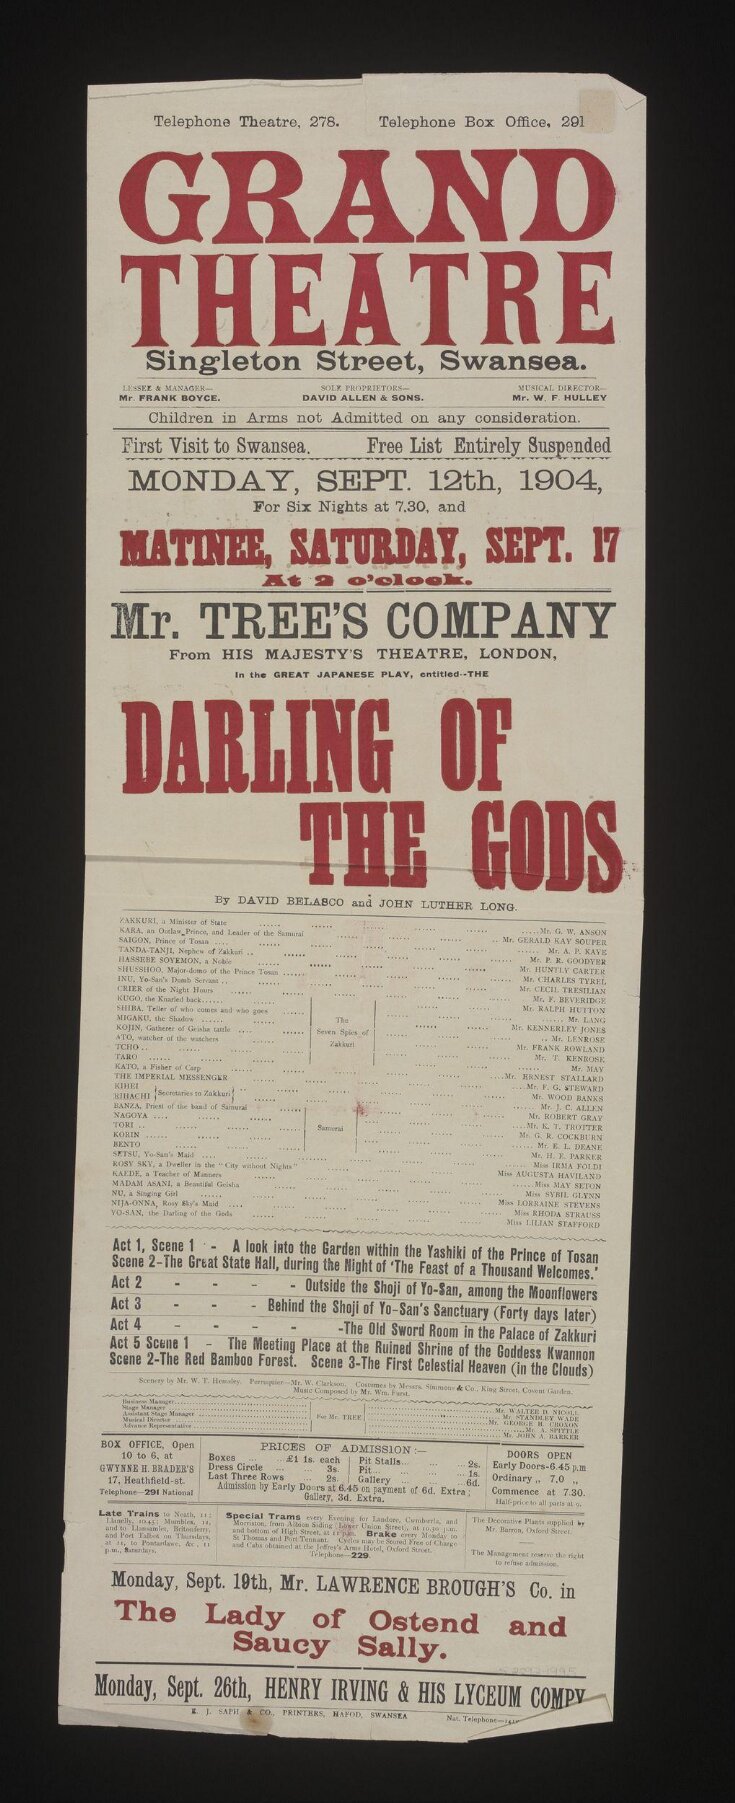 The Darling of the Gods poster top image